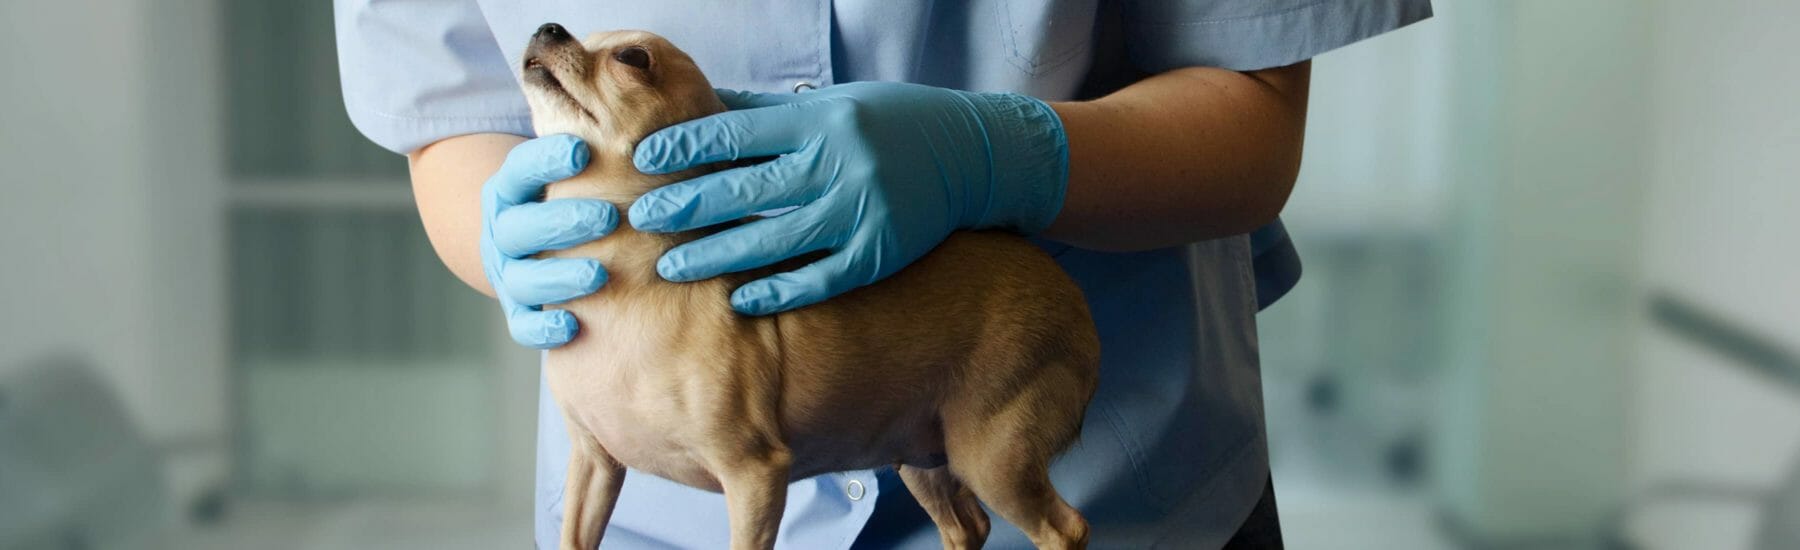 Veterinarian wearing gloves and holding the neck of a dog